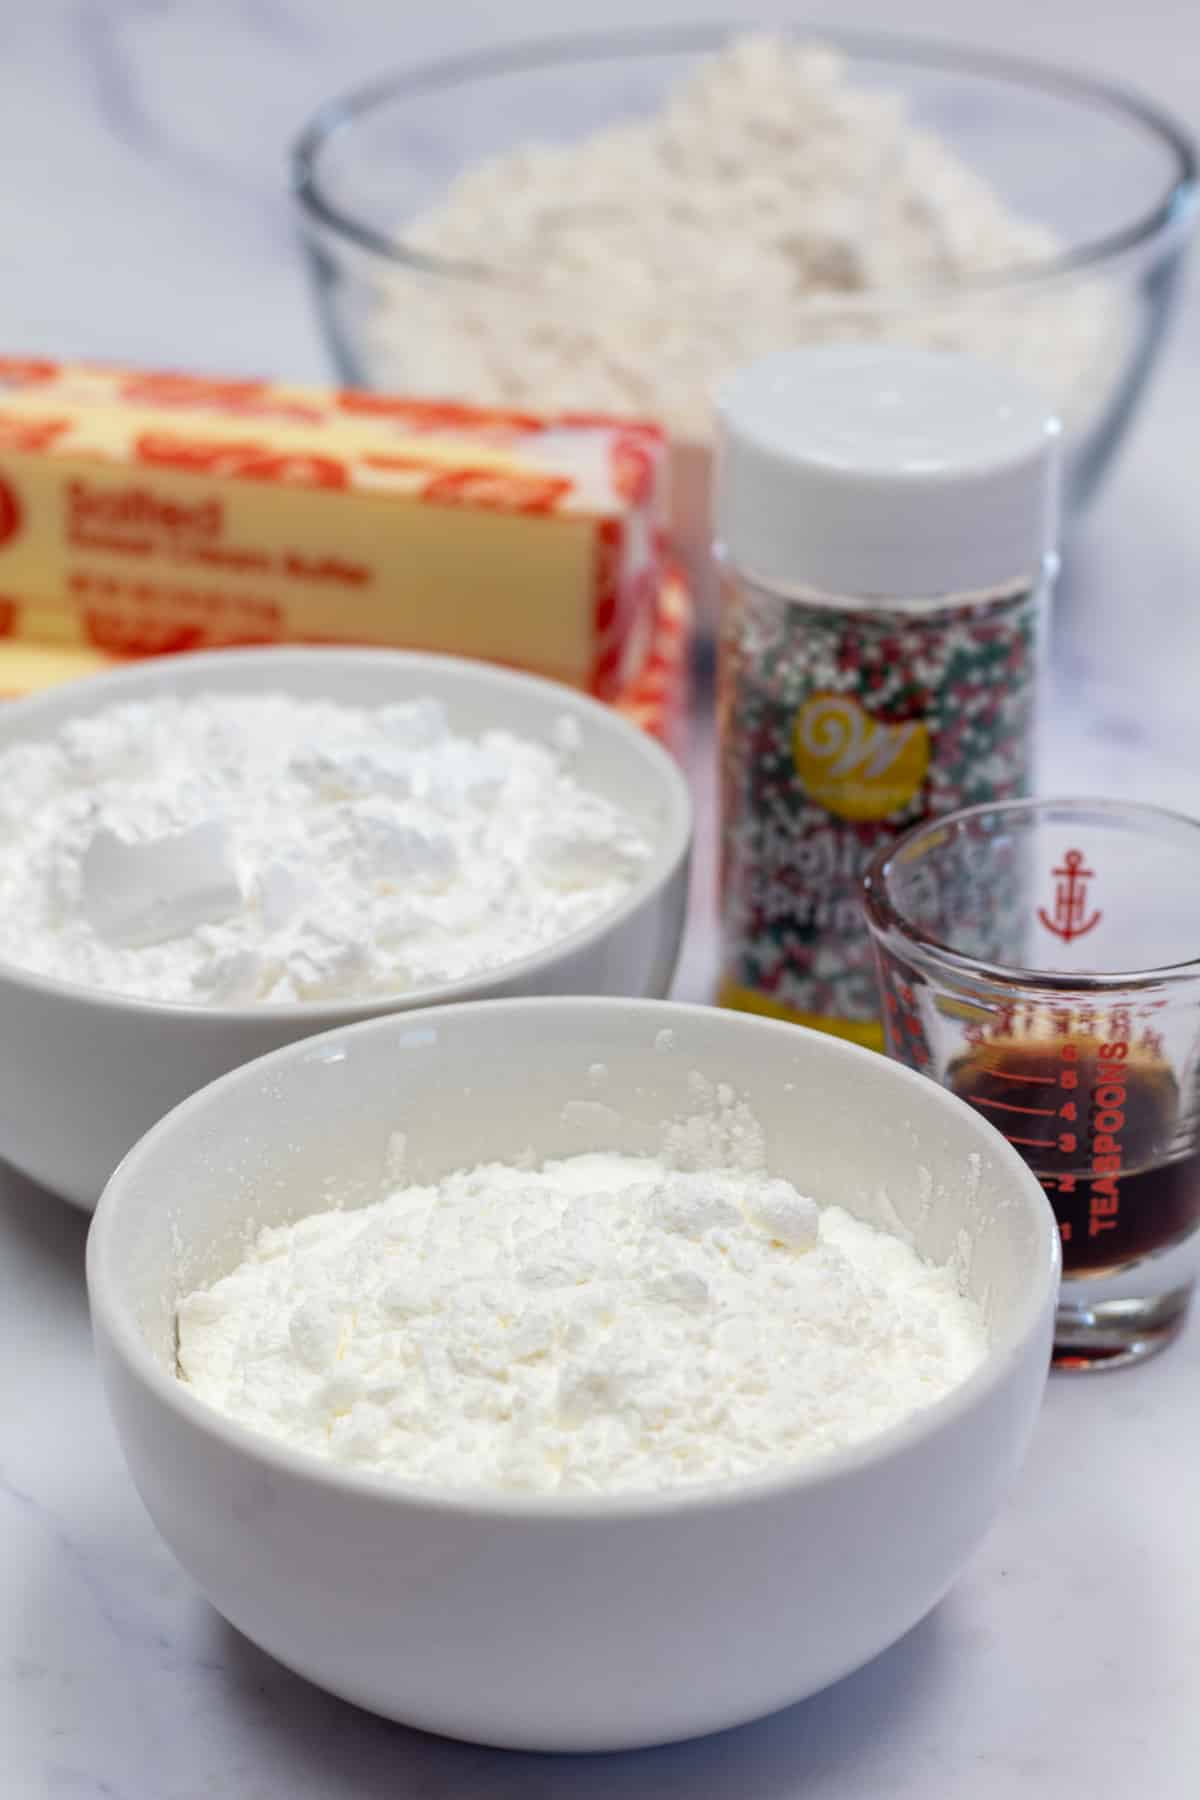 Tall image showing whipped shortbread cookie ingredients.